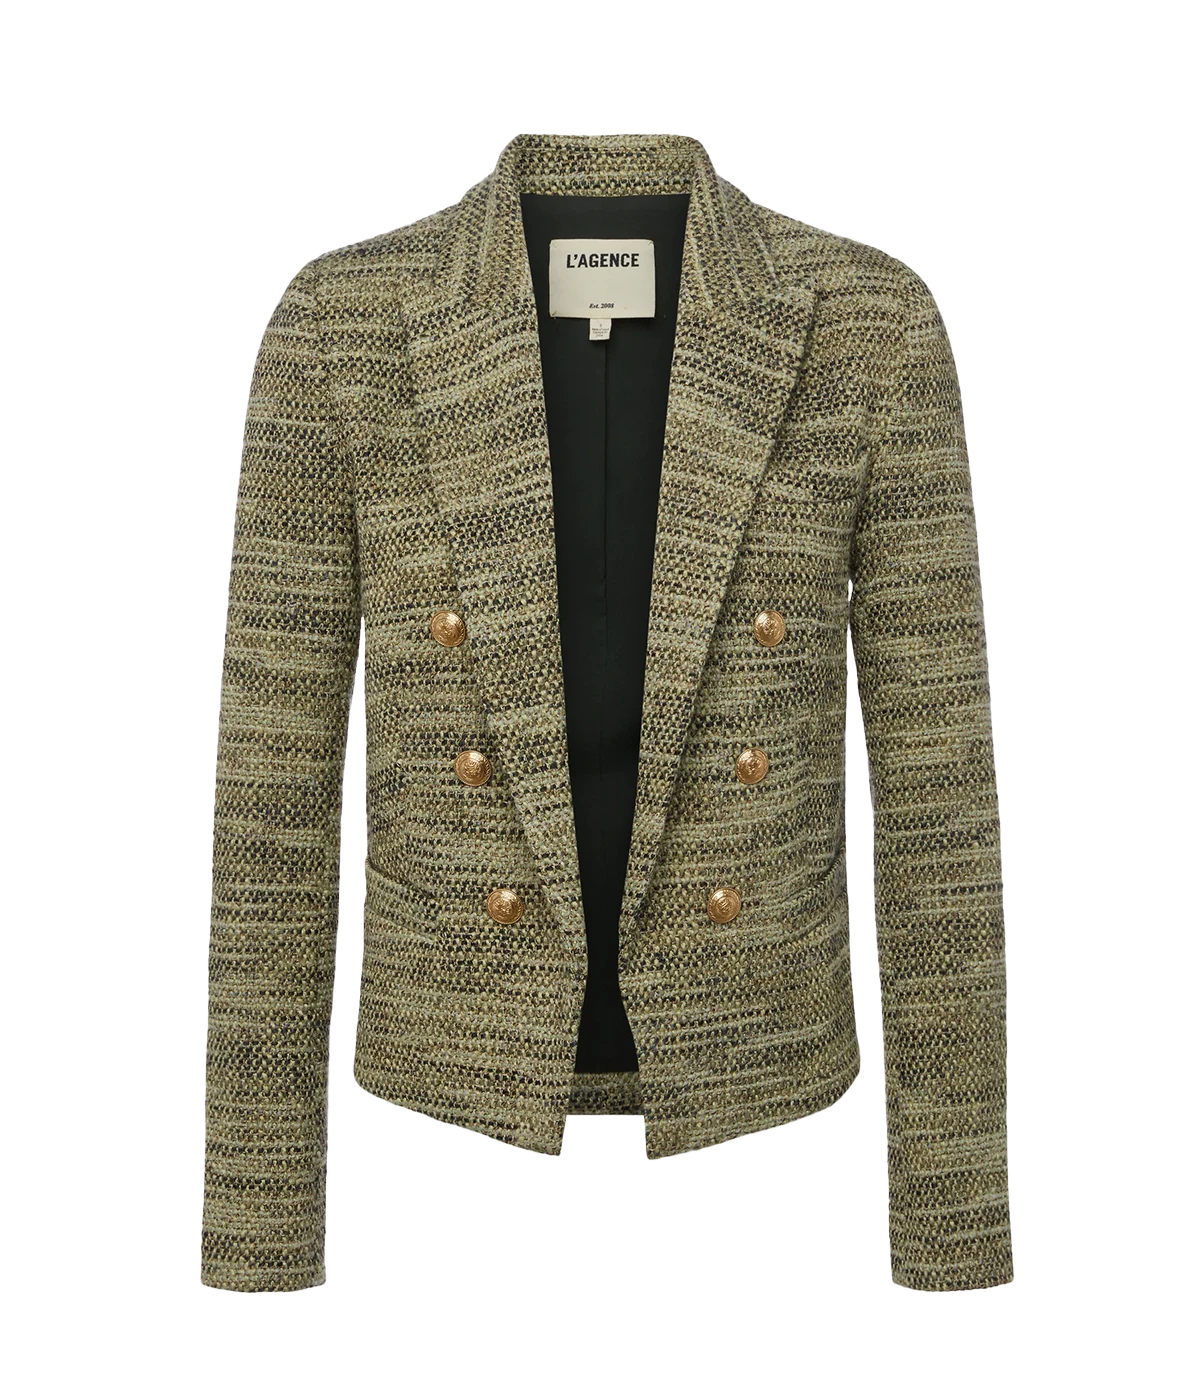 An olive green mal tweed blazer, with gold hardware, cropped cut, sophisticated shoulder pads and lapels. Work wear, everyday classic, trendy, fashion forward, transition piece, Made in California. 